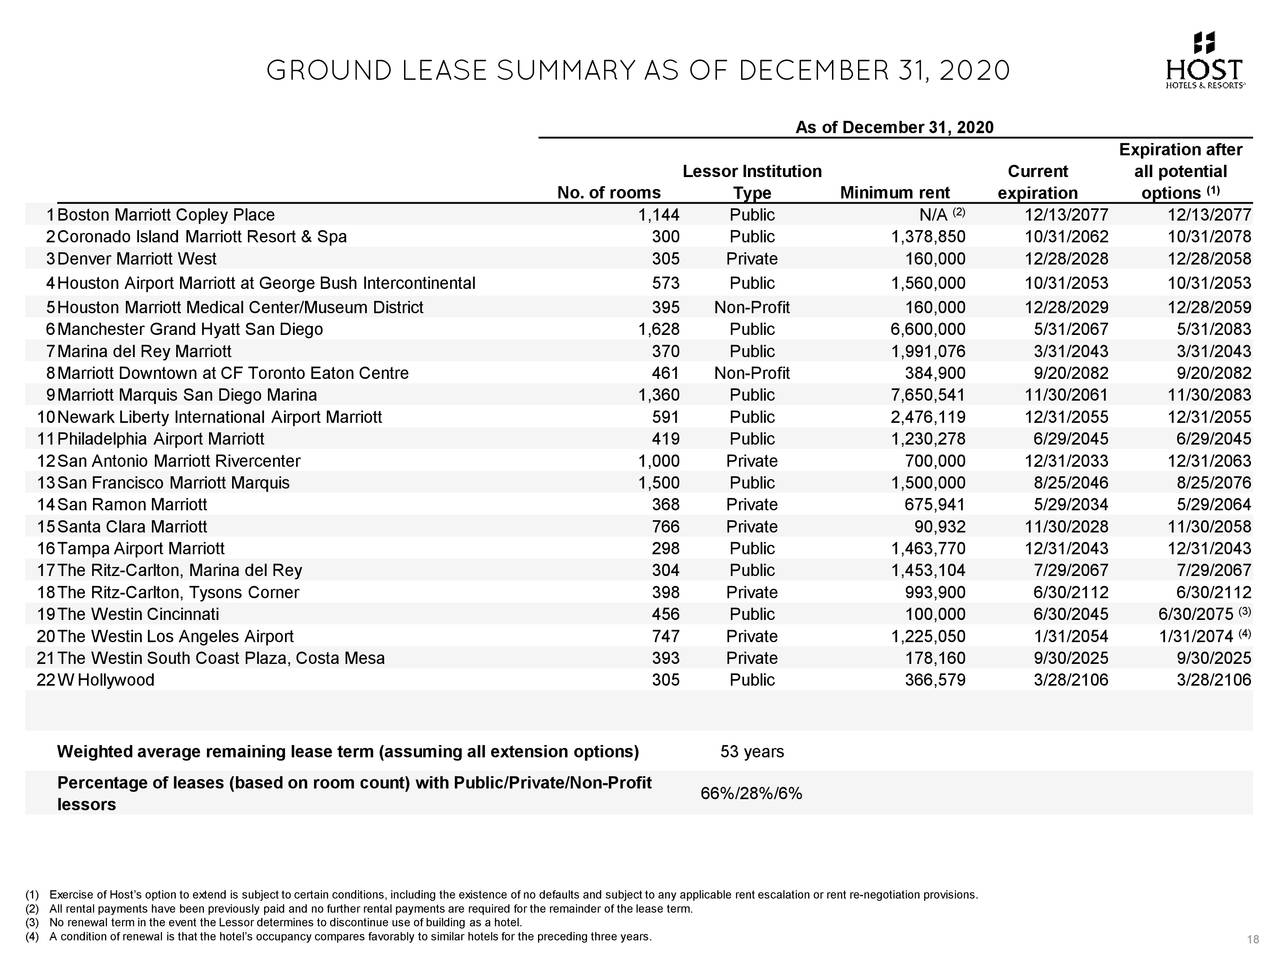 GROUND LEASE SUMMARY AS OF DECEMBER 31, 2020